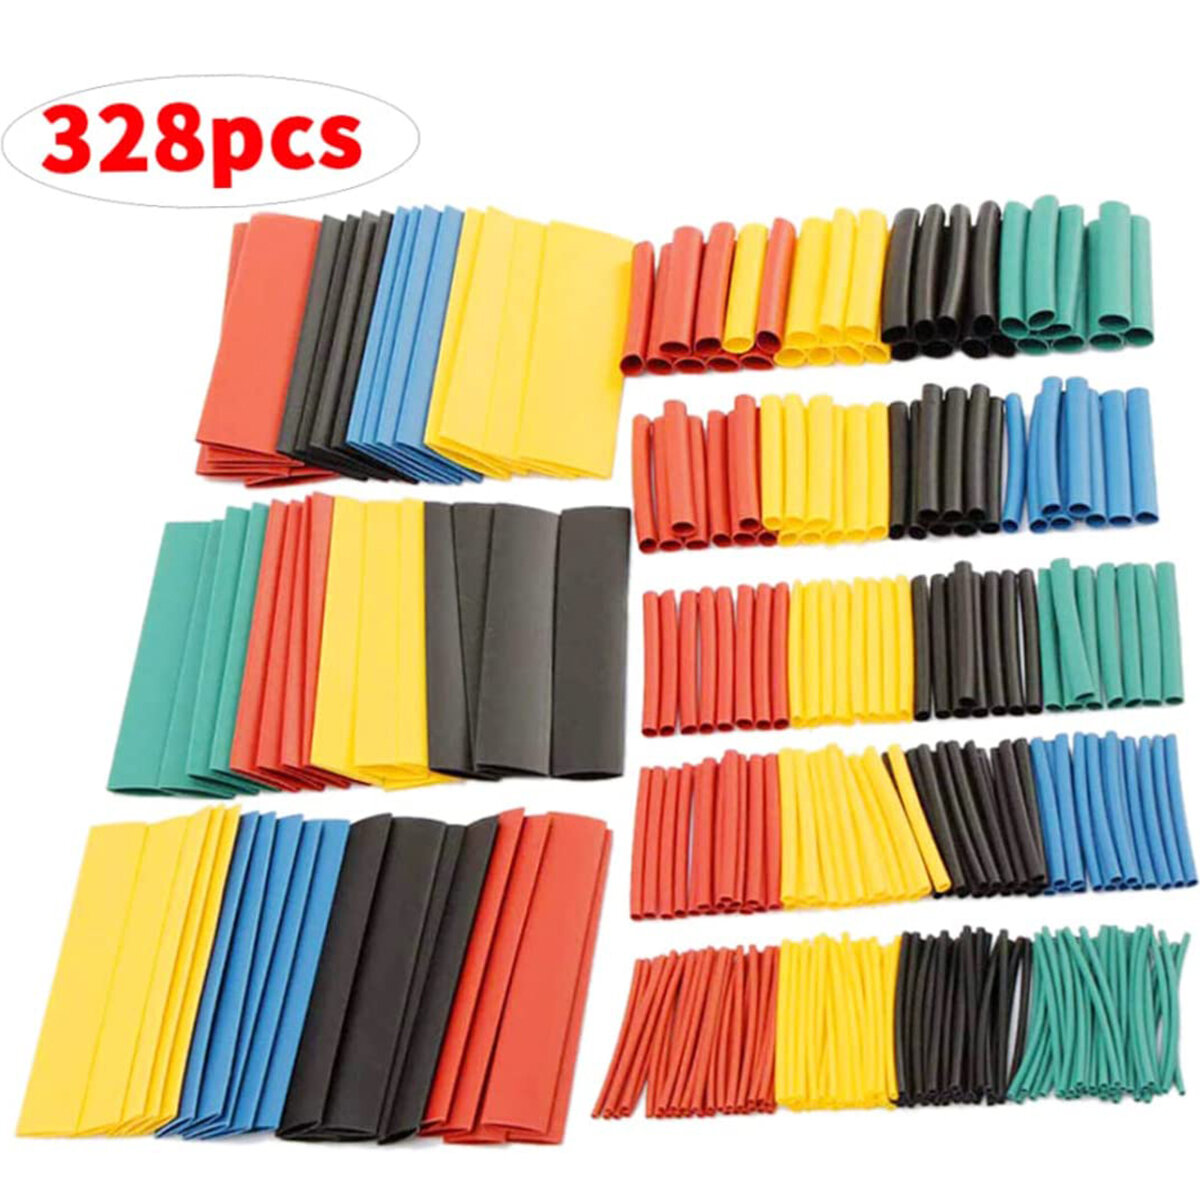 328PCS Heat Shrink Tubing 2:1 Electrical Wire Cable Wrap Sleeving Tube Kit Electric Insulation Heat Shrink Tube Kit for